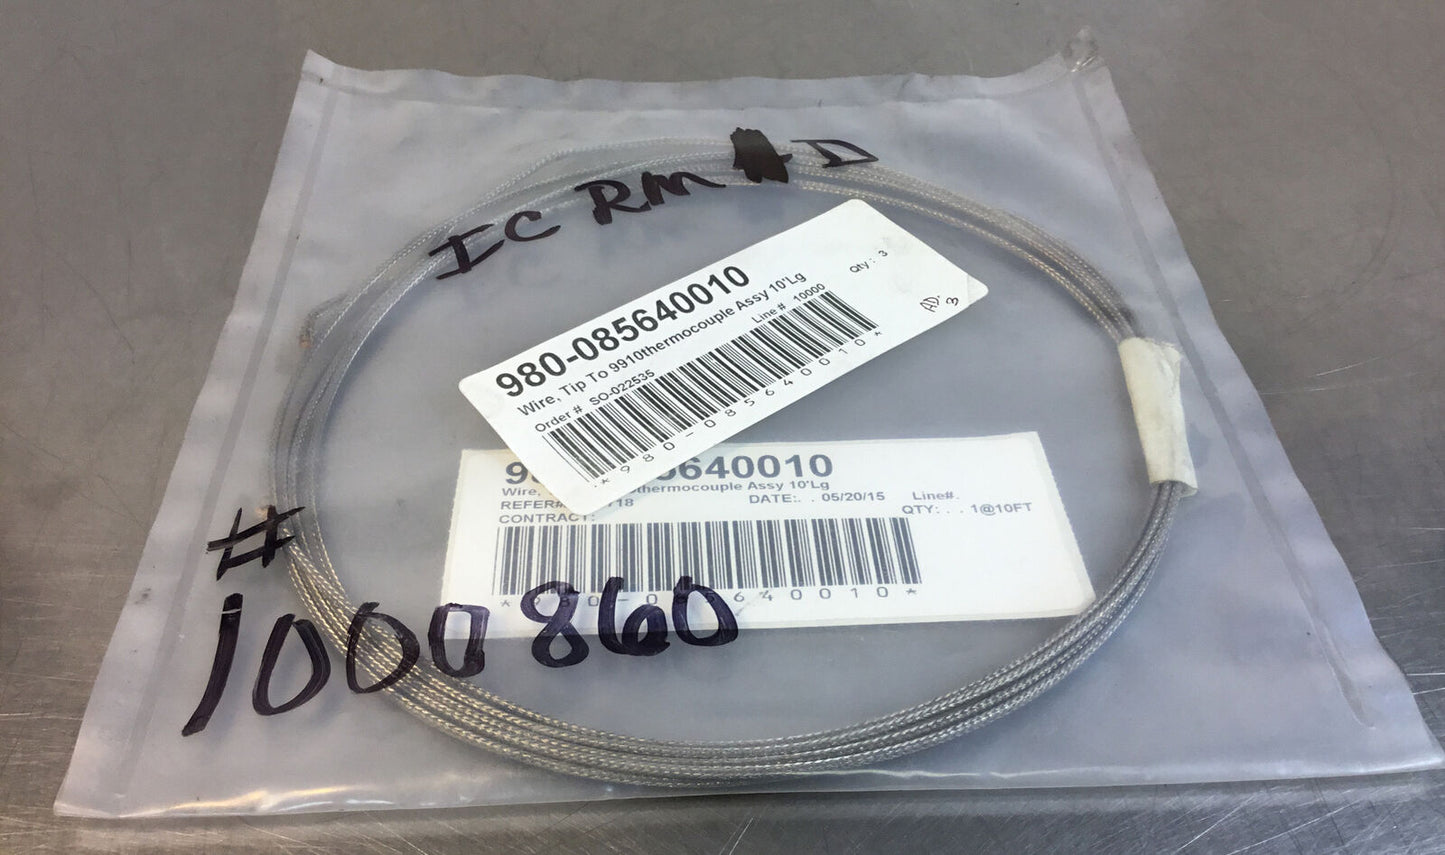 980-085640010  Thermocouple Wire 9910  10 Feet Long     5D